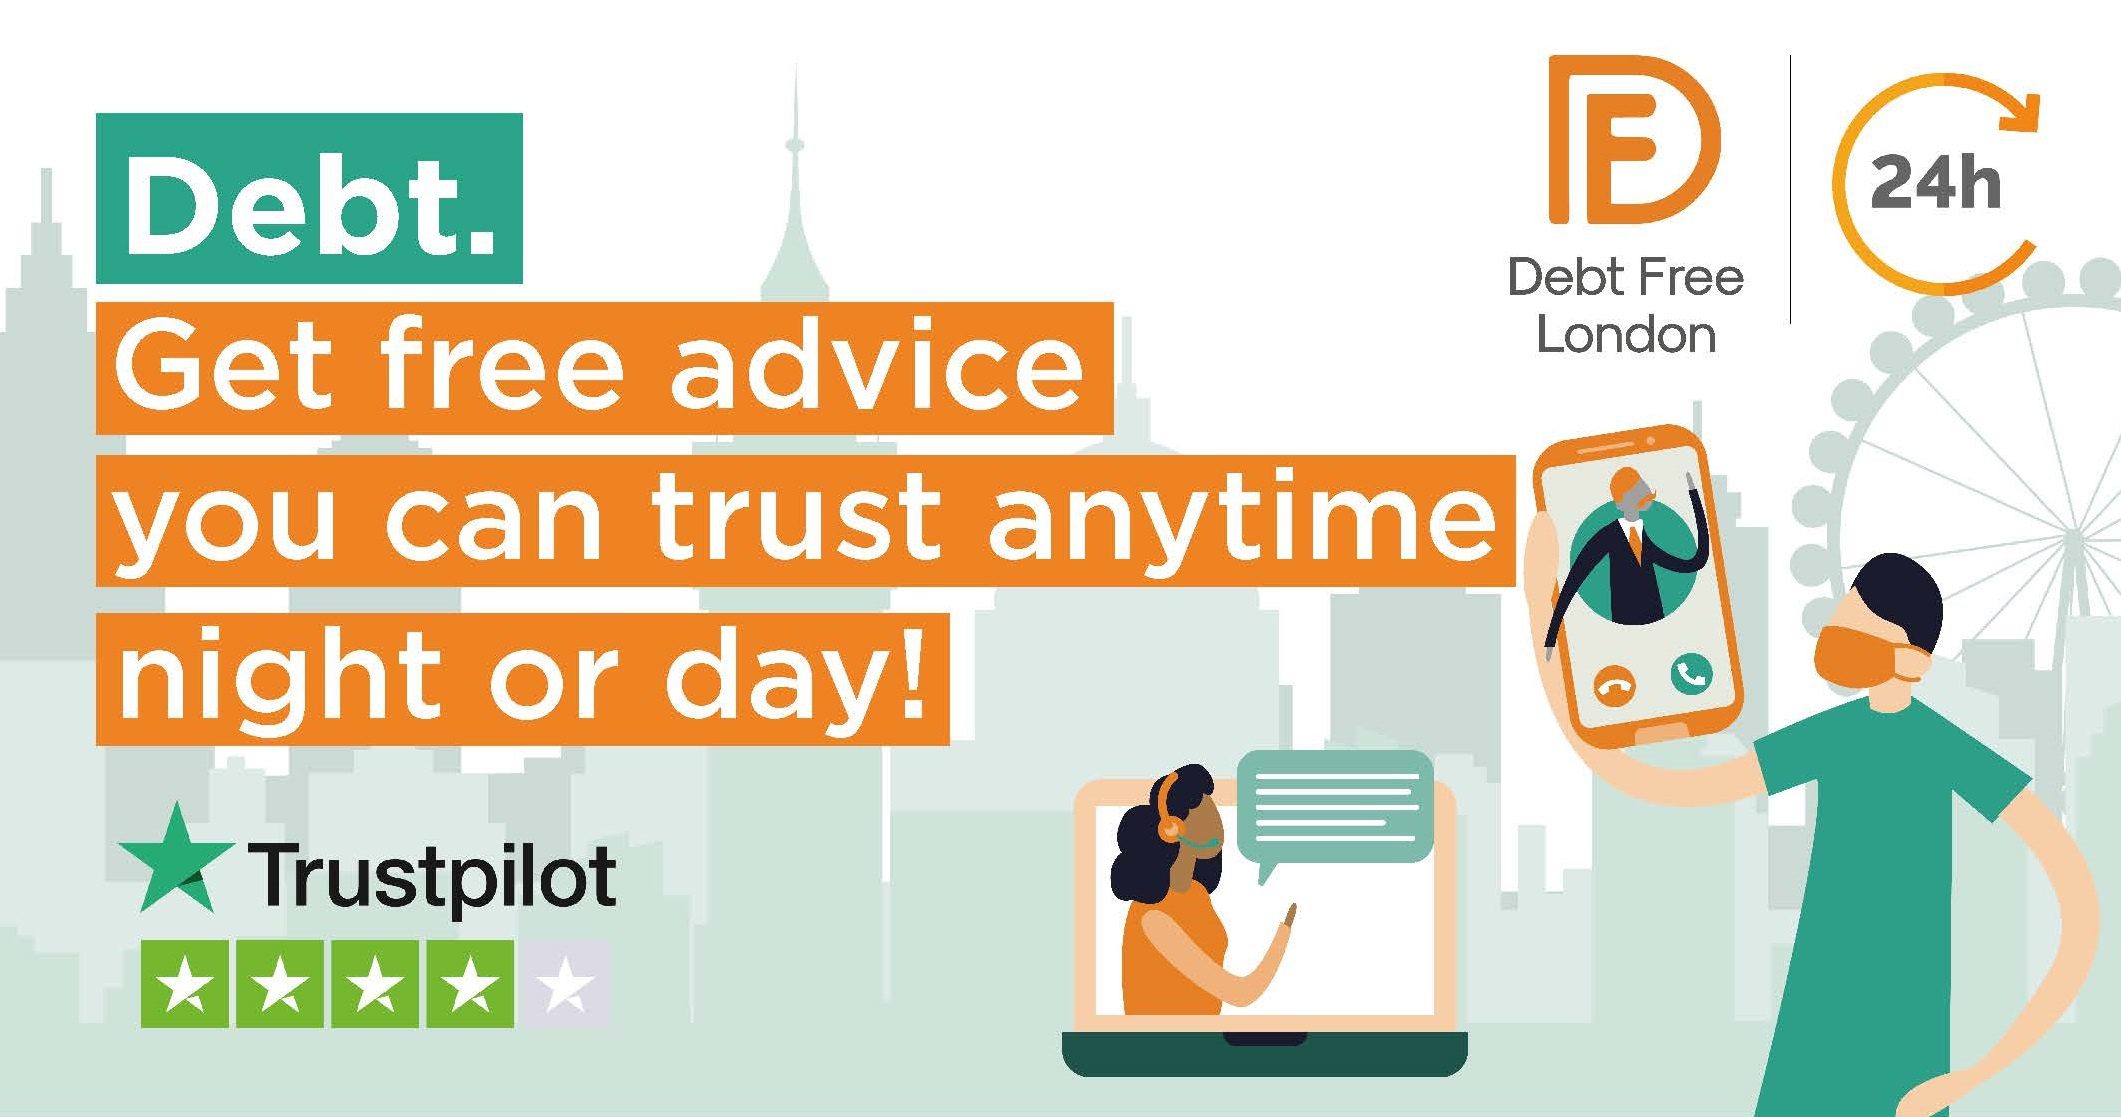 Debt Free London to offer 24/7 debt advice during January